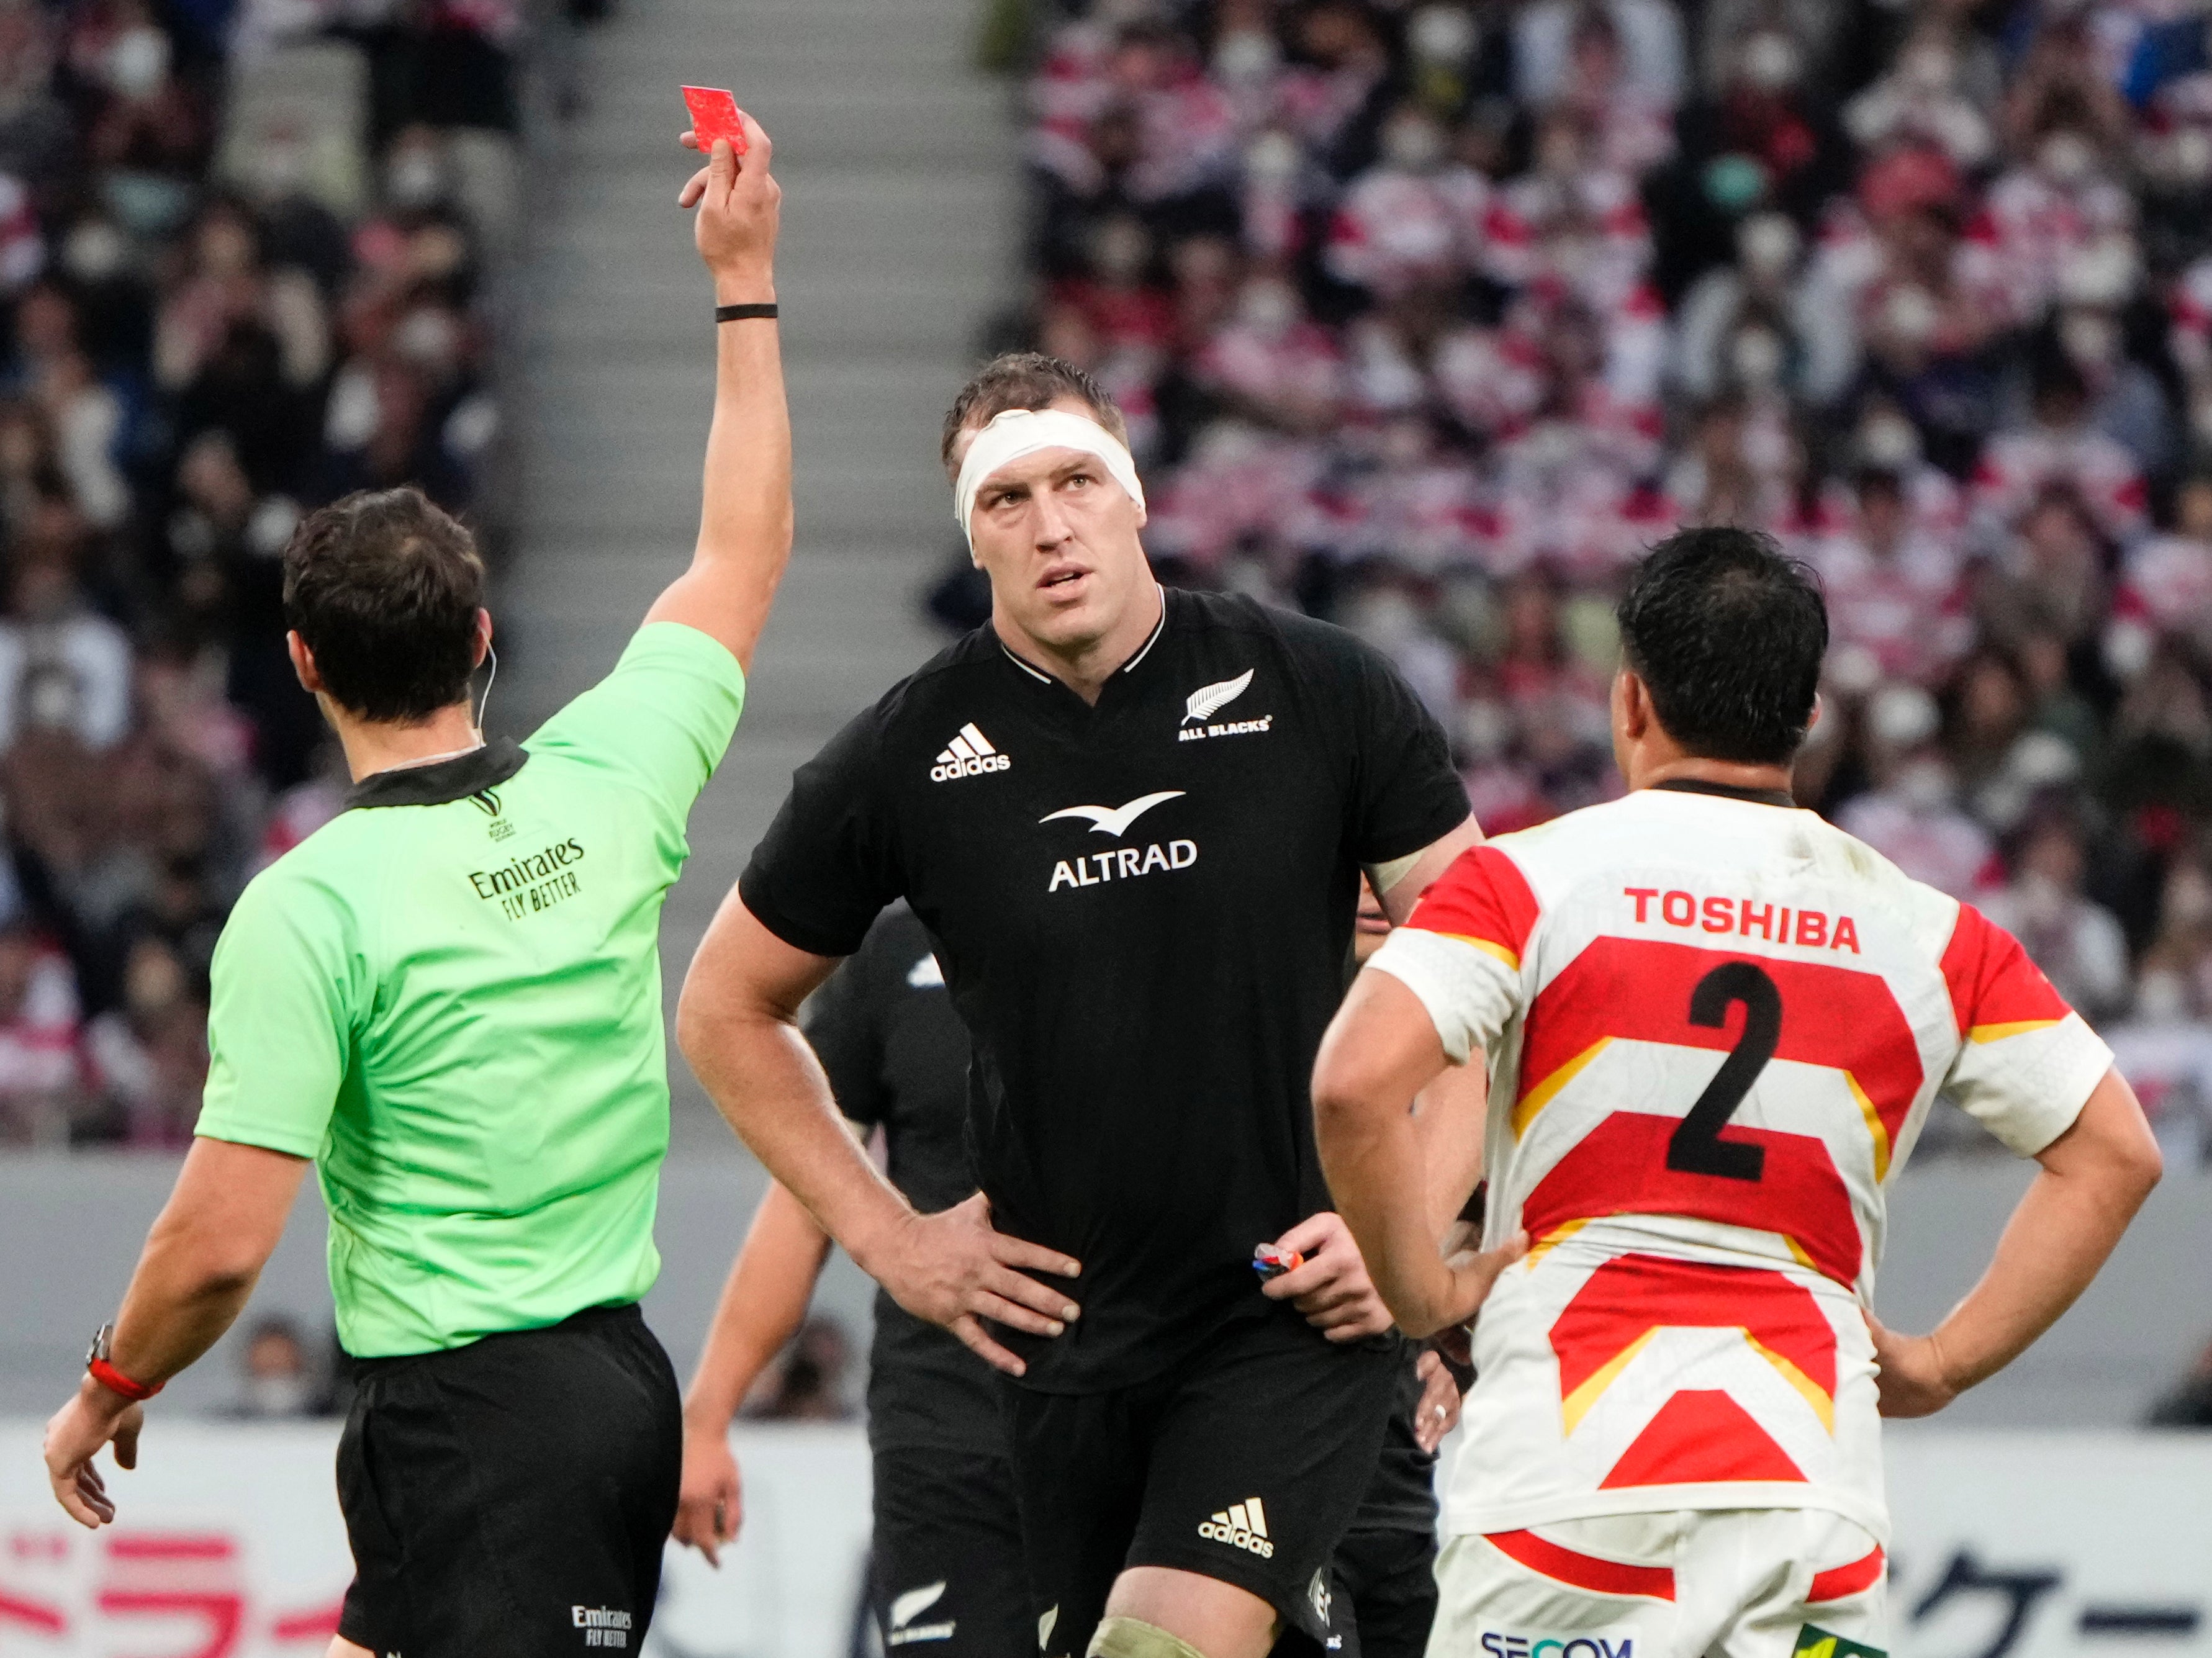 The second rower was sent off for dangerous play against Japan